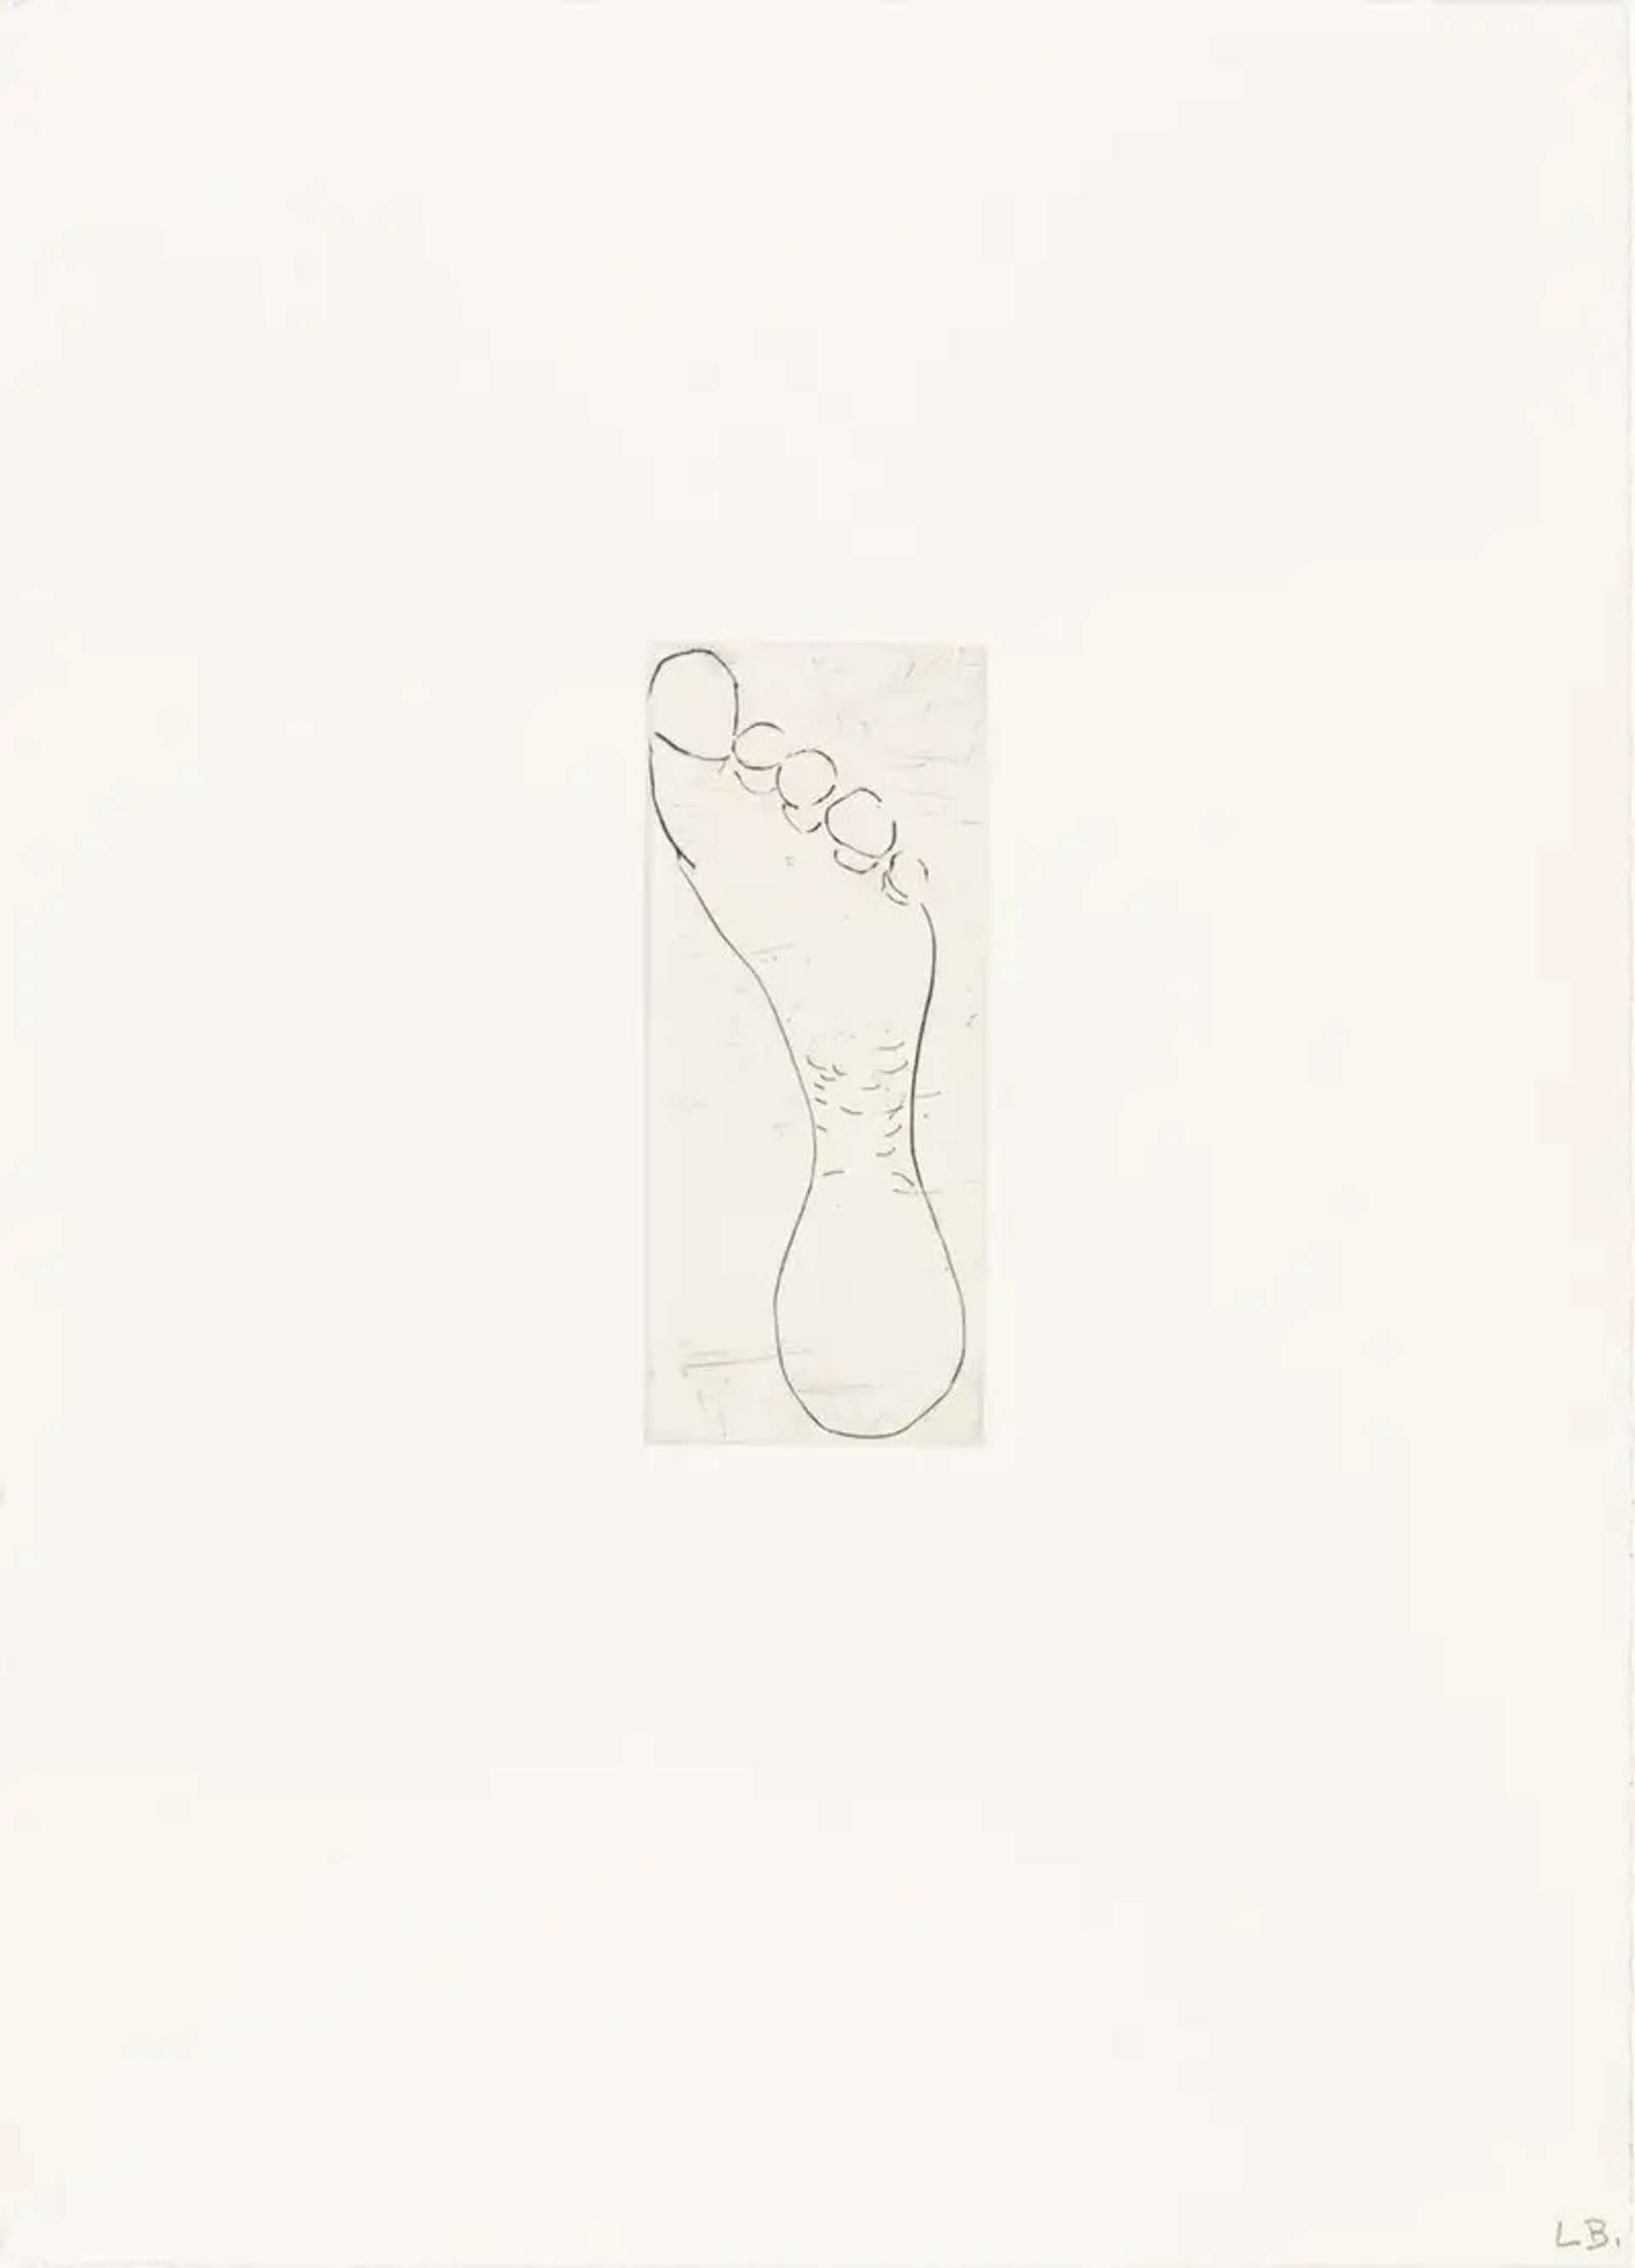 Louise Bourgeois Untitled No. 9. A monochromatic etching of an anatomical depiction of the posterior view of a foot.